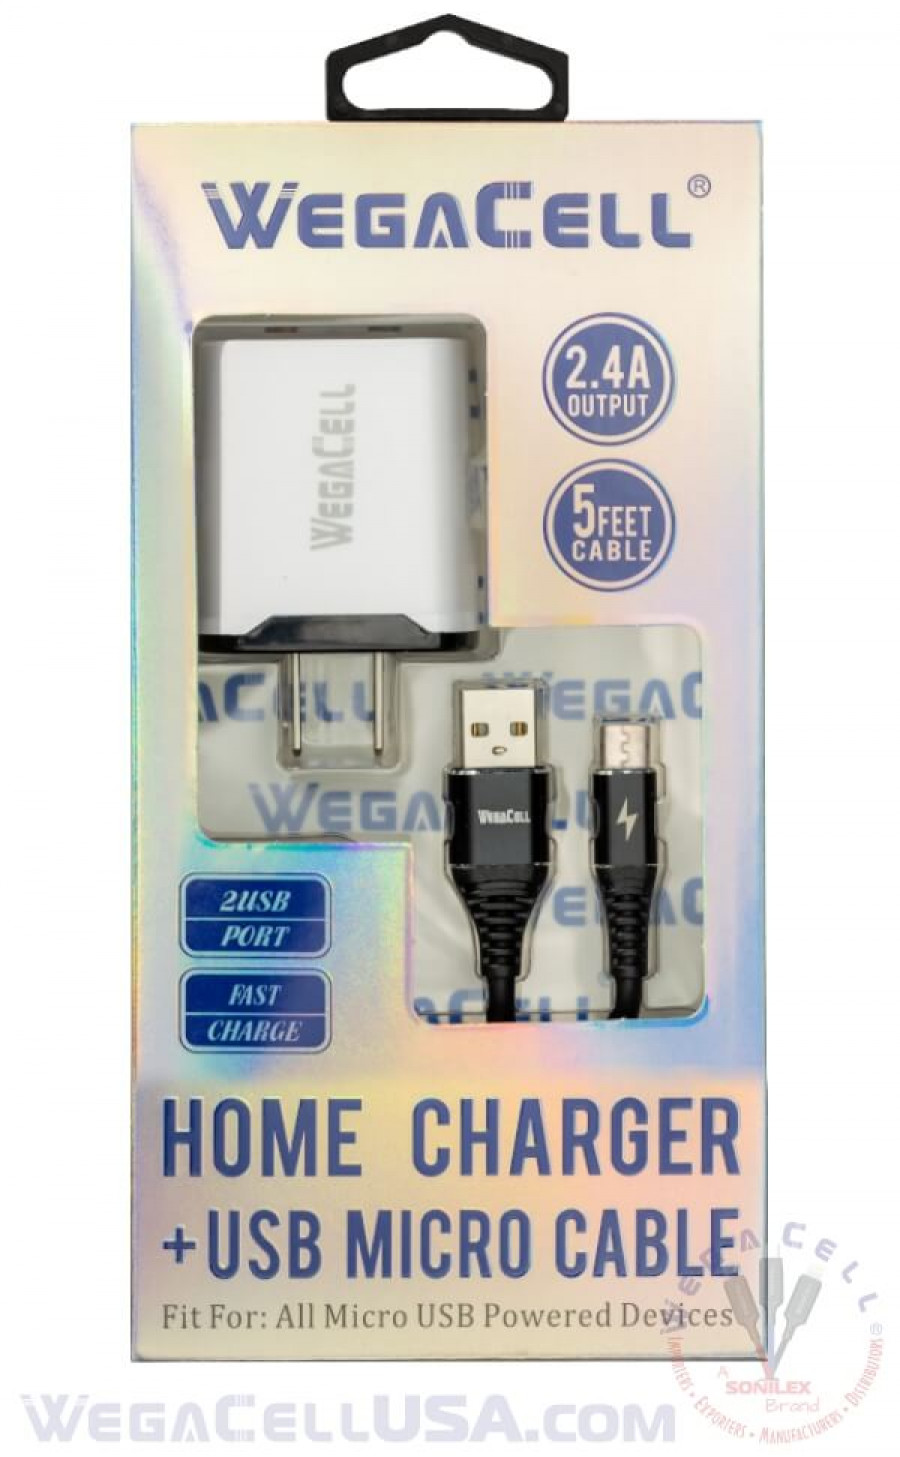 android universal dual port wall charger v8 micro cable combo - wholesale pkg. wegacell: wl-1602mcr-2hc data cable charger combo 22